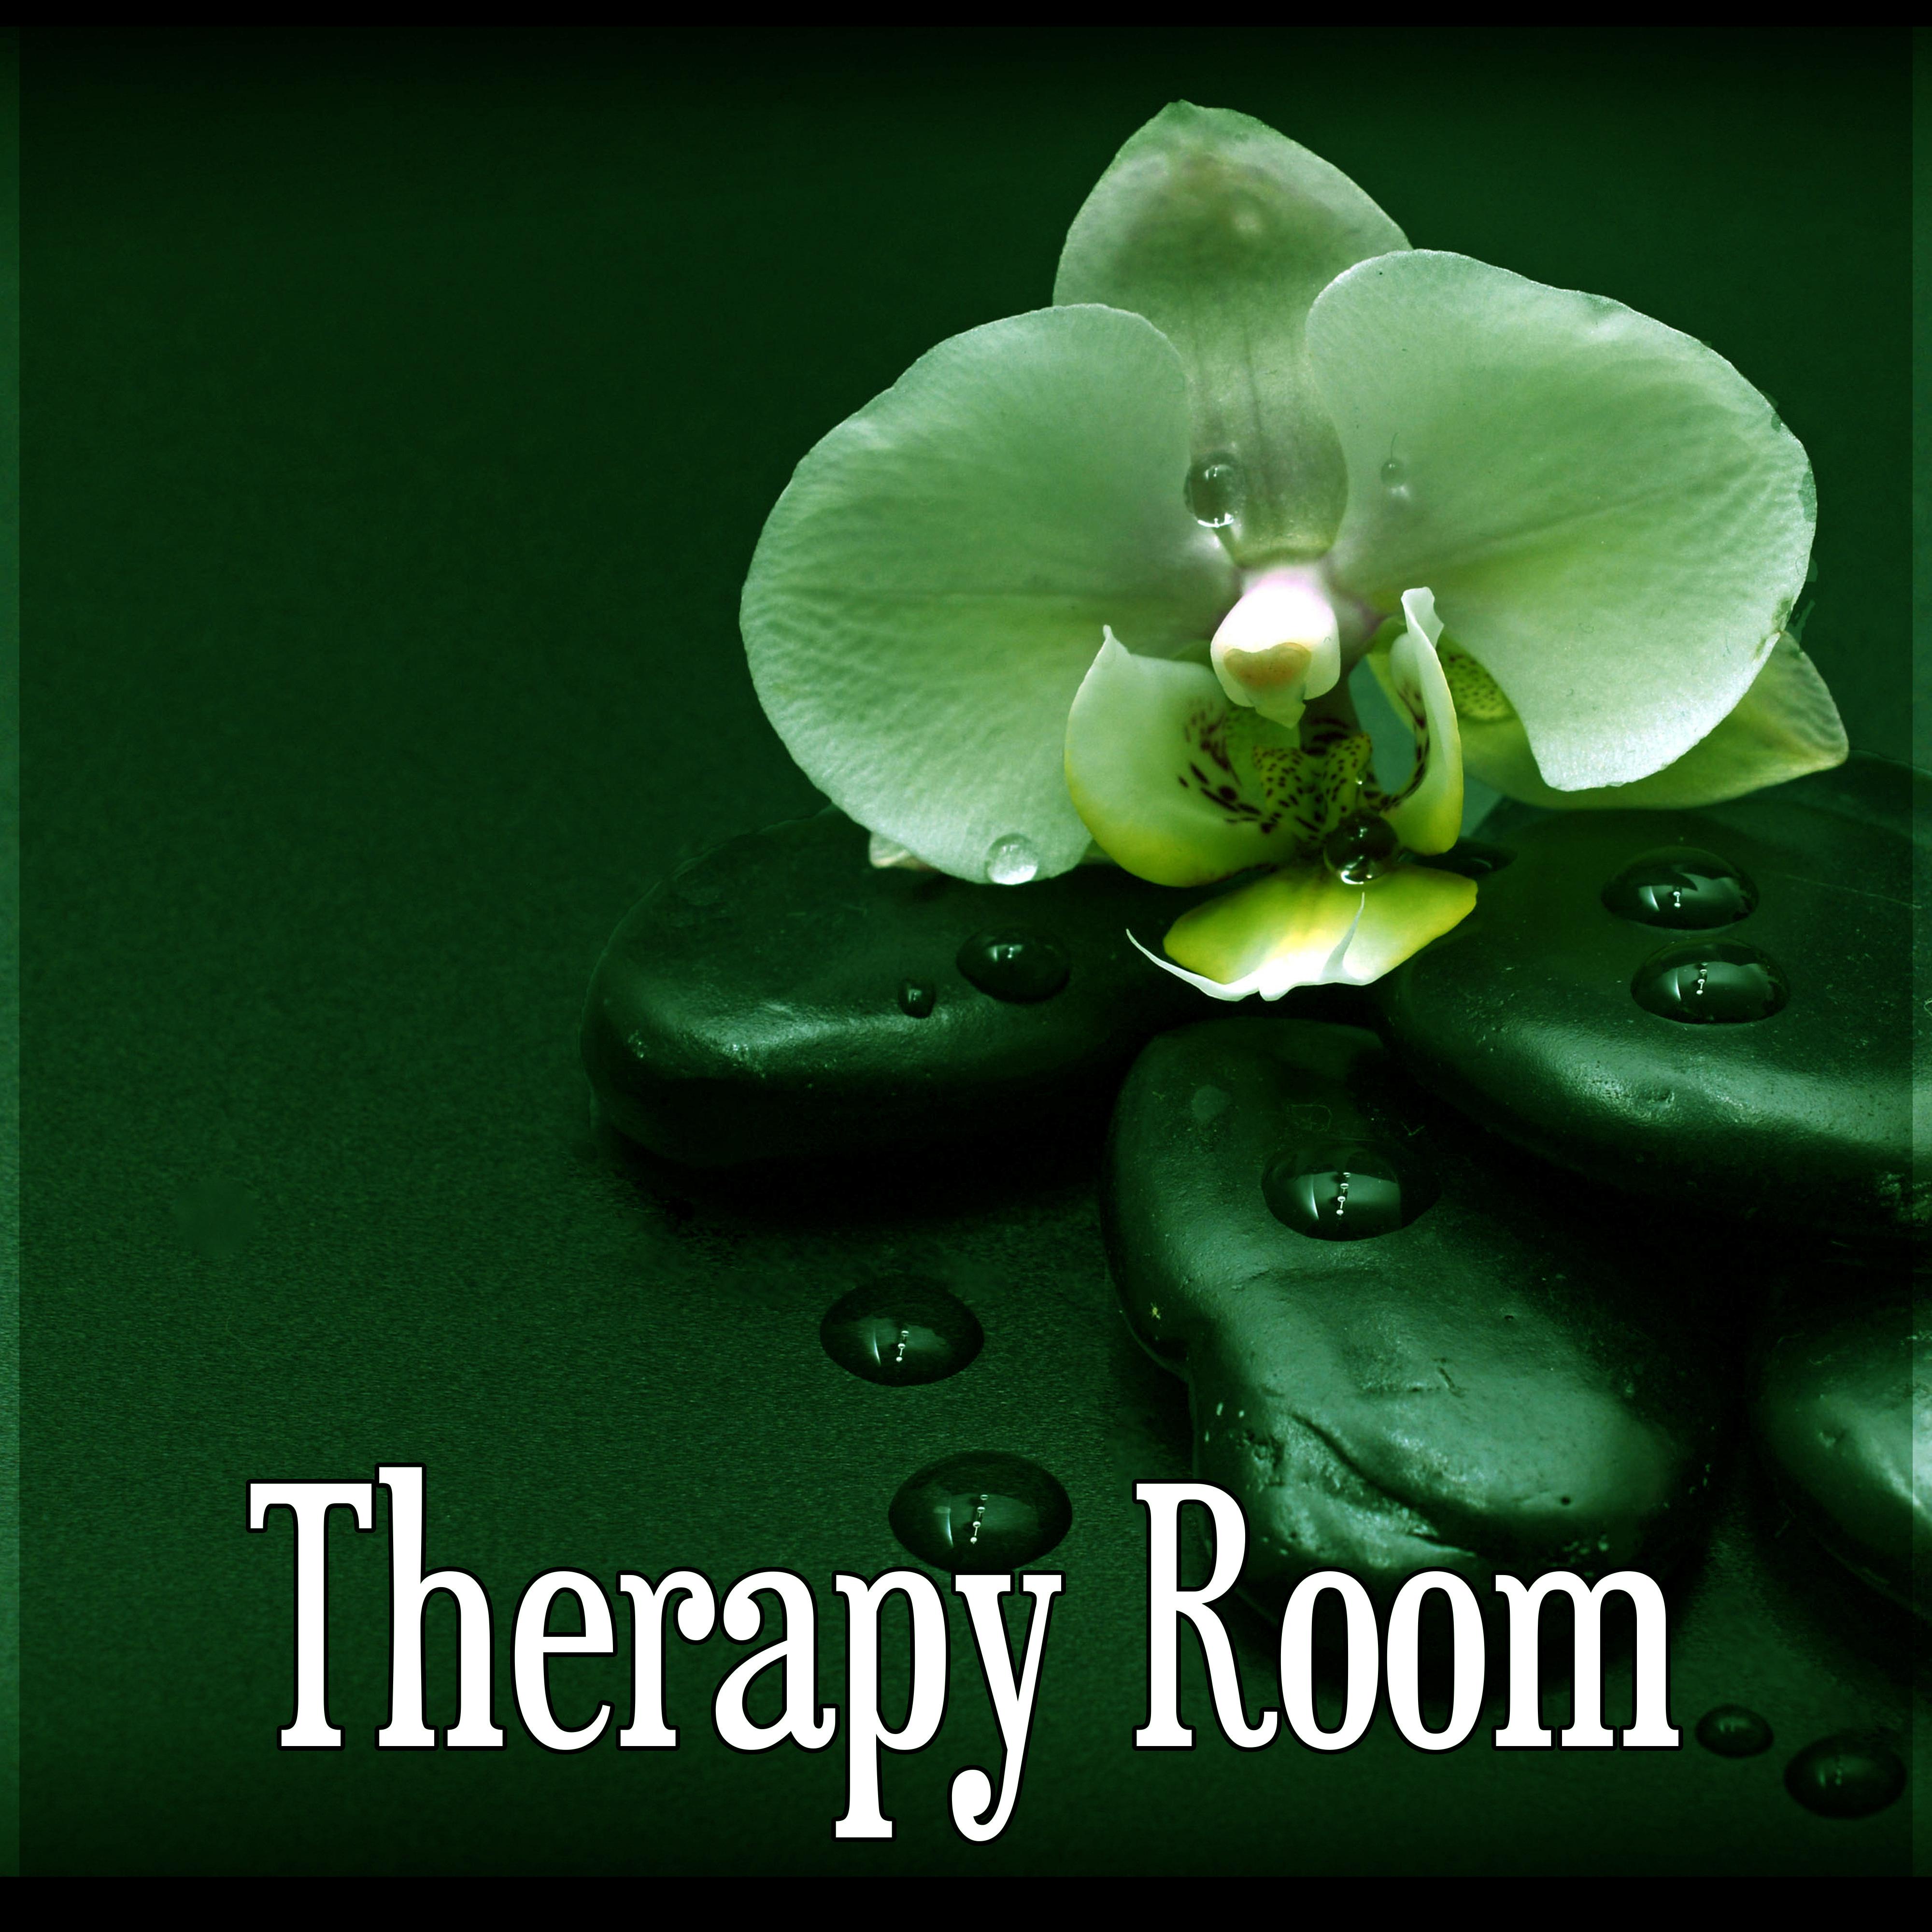 Therapy Room  Sensual Moments In Spa, Massage Therapy, Music for Healing Through Sound and Touch, Serenity Relaxing Spa